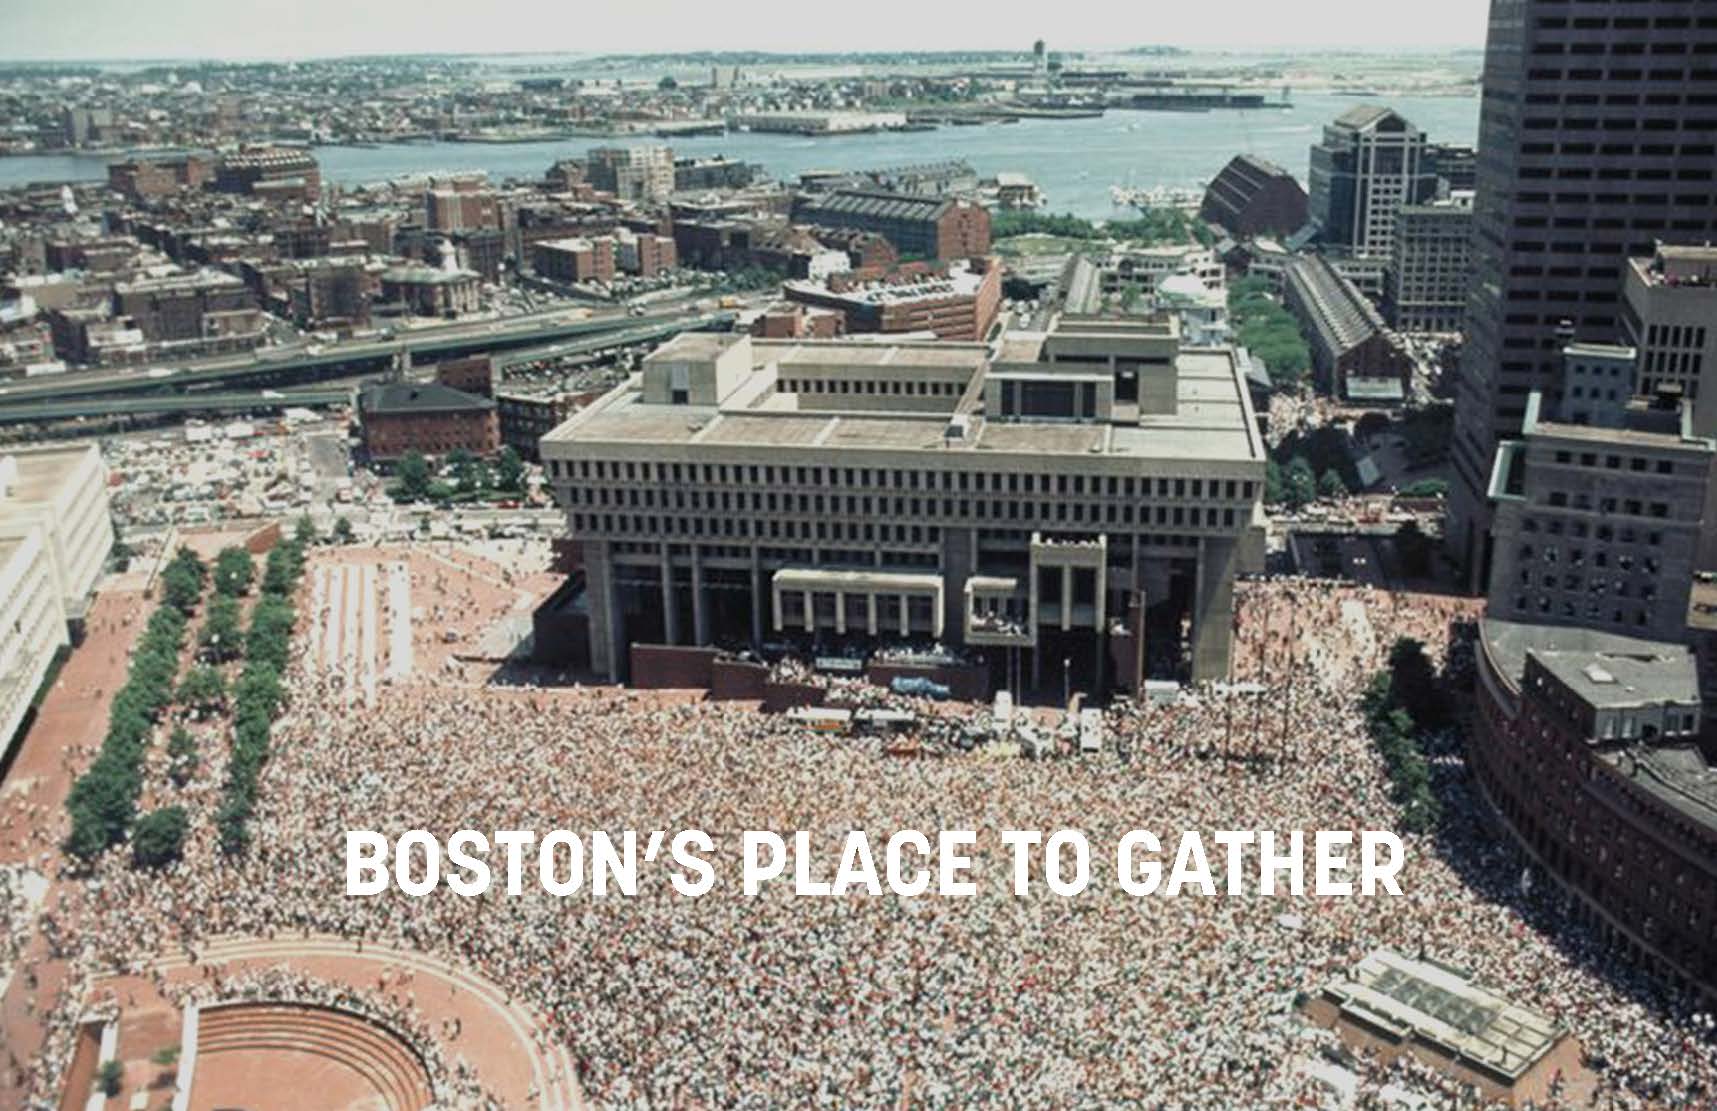 An image of Boston City Hall Plaza full of people with text over it that says Boston's place to gather